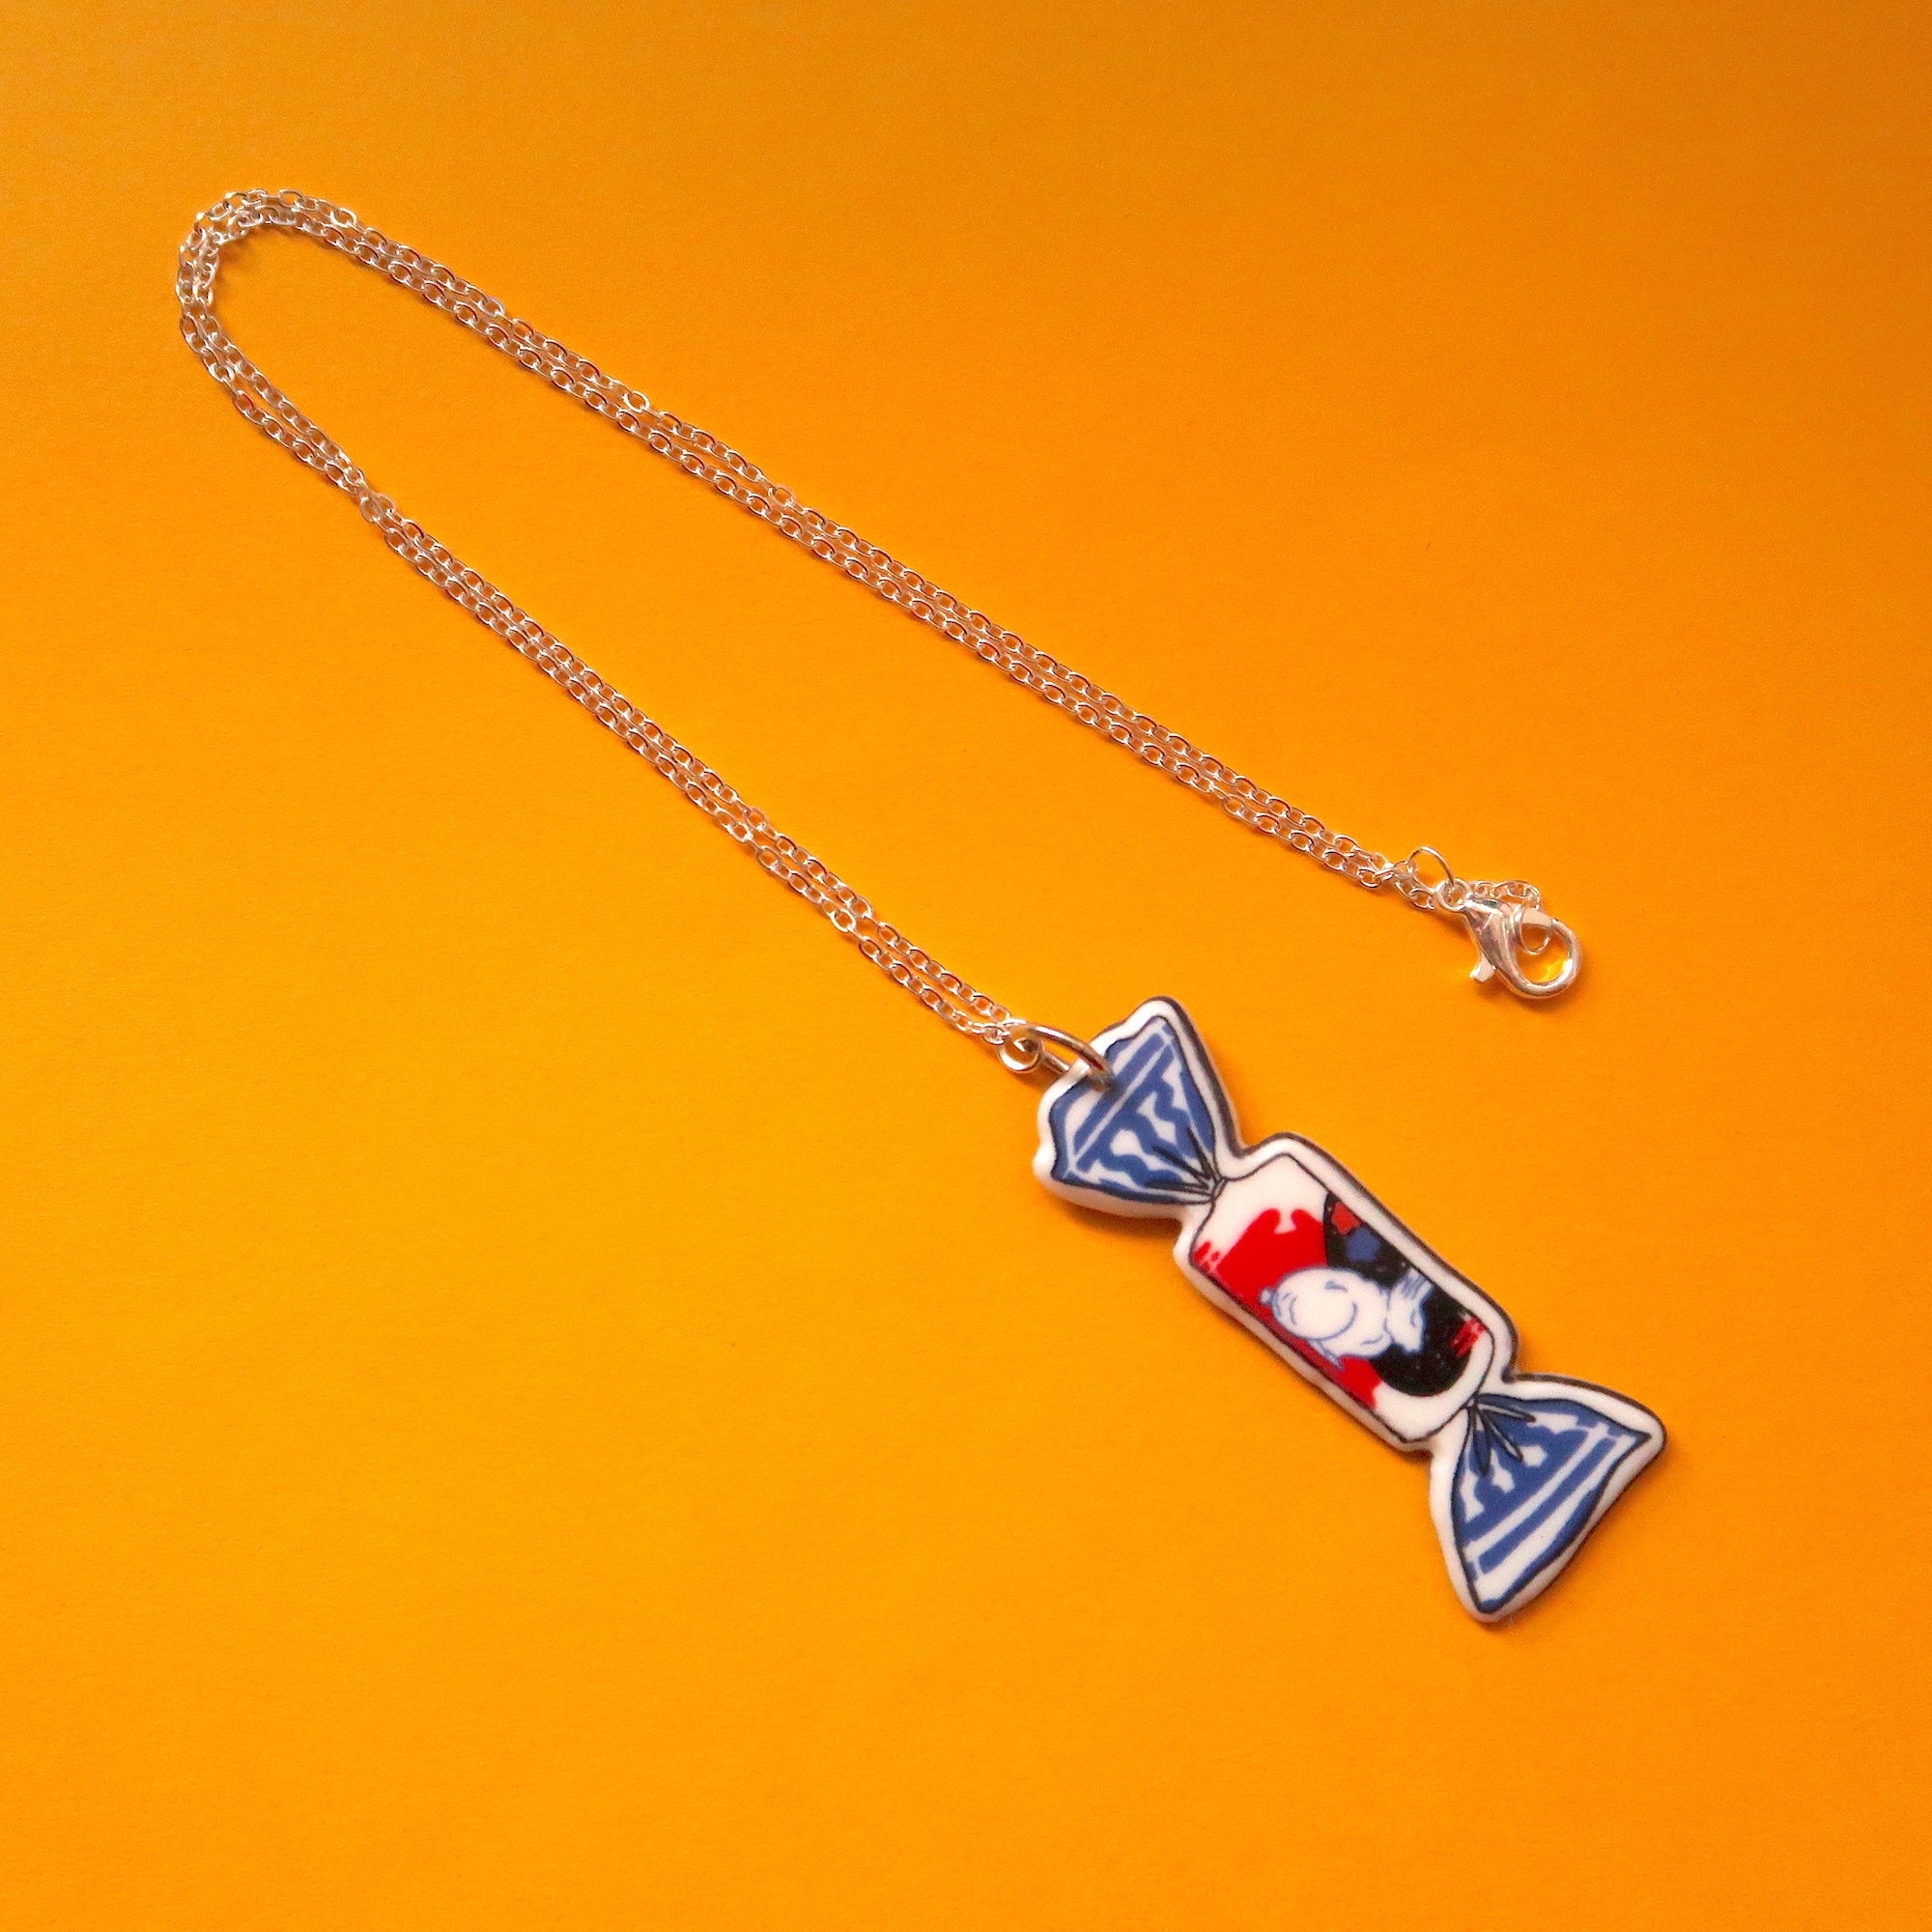 White Rabbit Candy Necklace